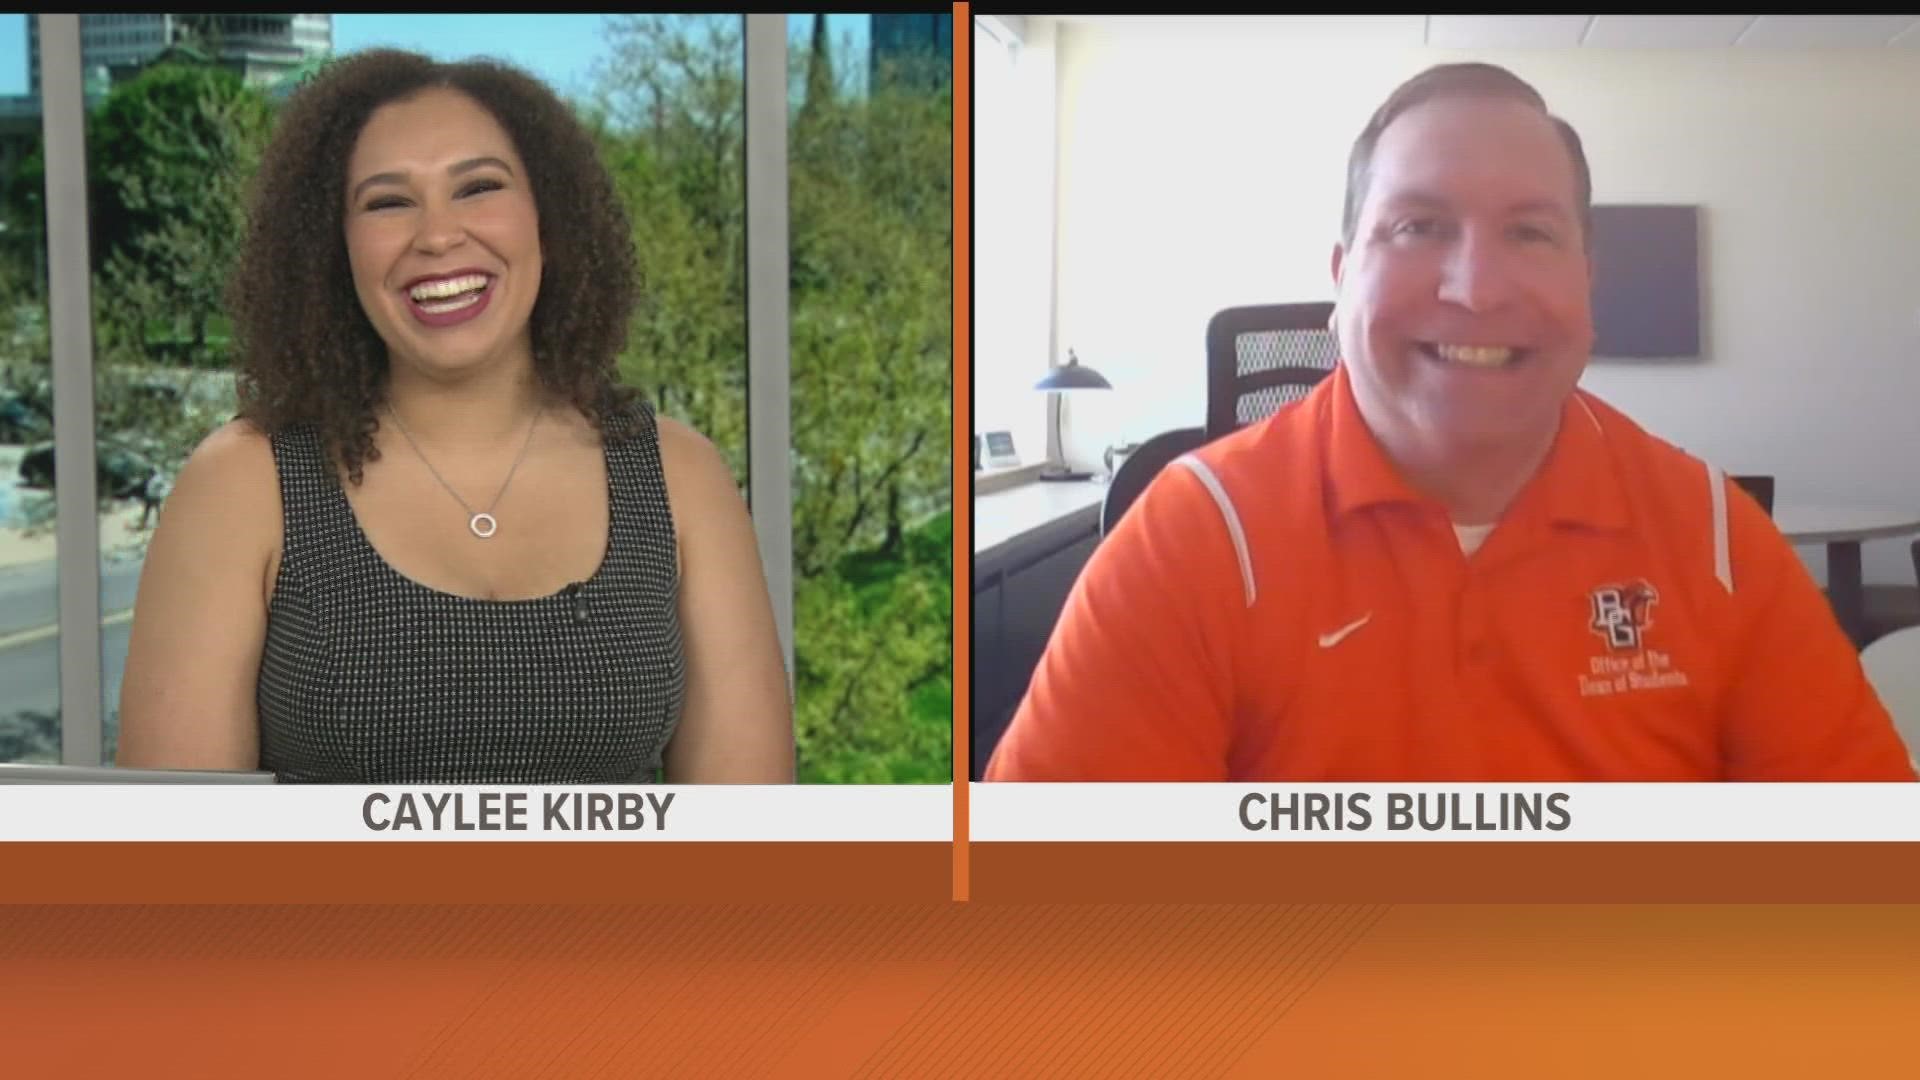 BGSU Dean of Students Chris Bullins joins WTOL 11 to talk about college life and how parents can help their incoming students adjust and find resources.